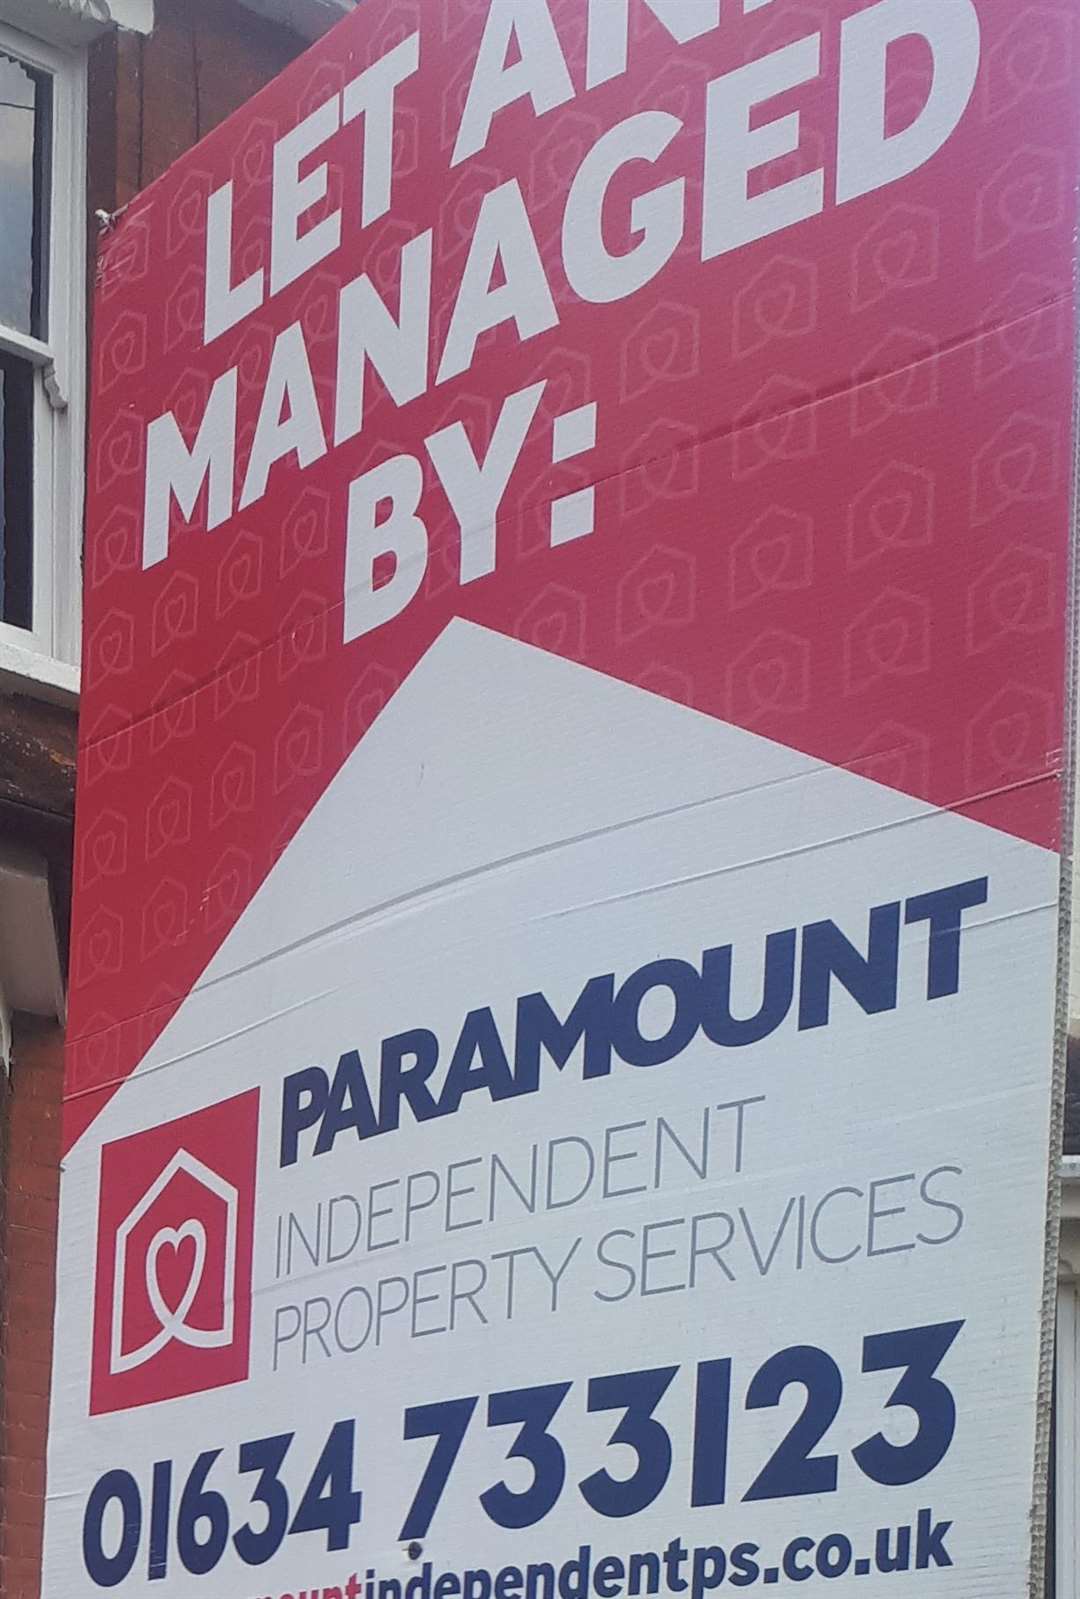 The Paramount sign outside the property